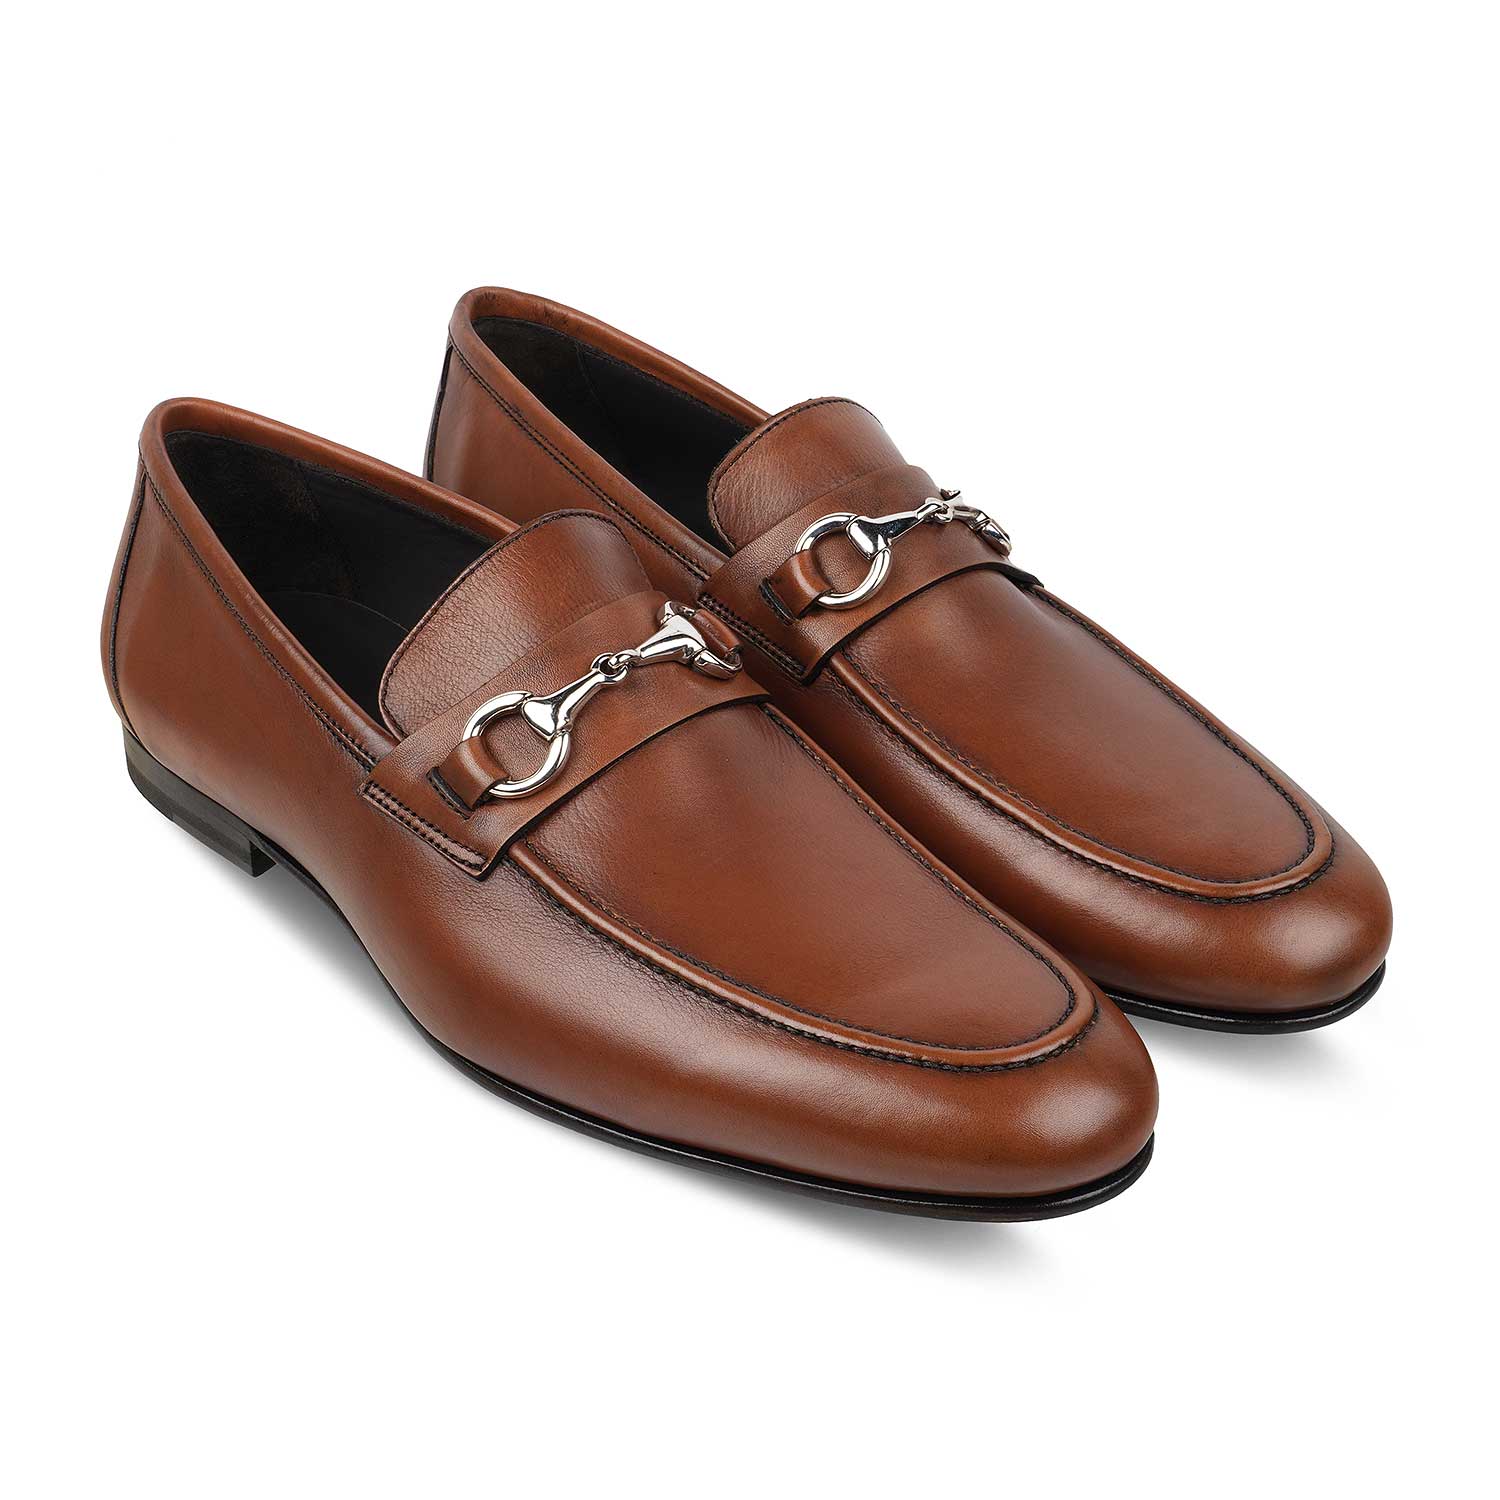 The Mancio Tan Men's Handcrafted Leather Loafers Tresmode